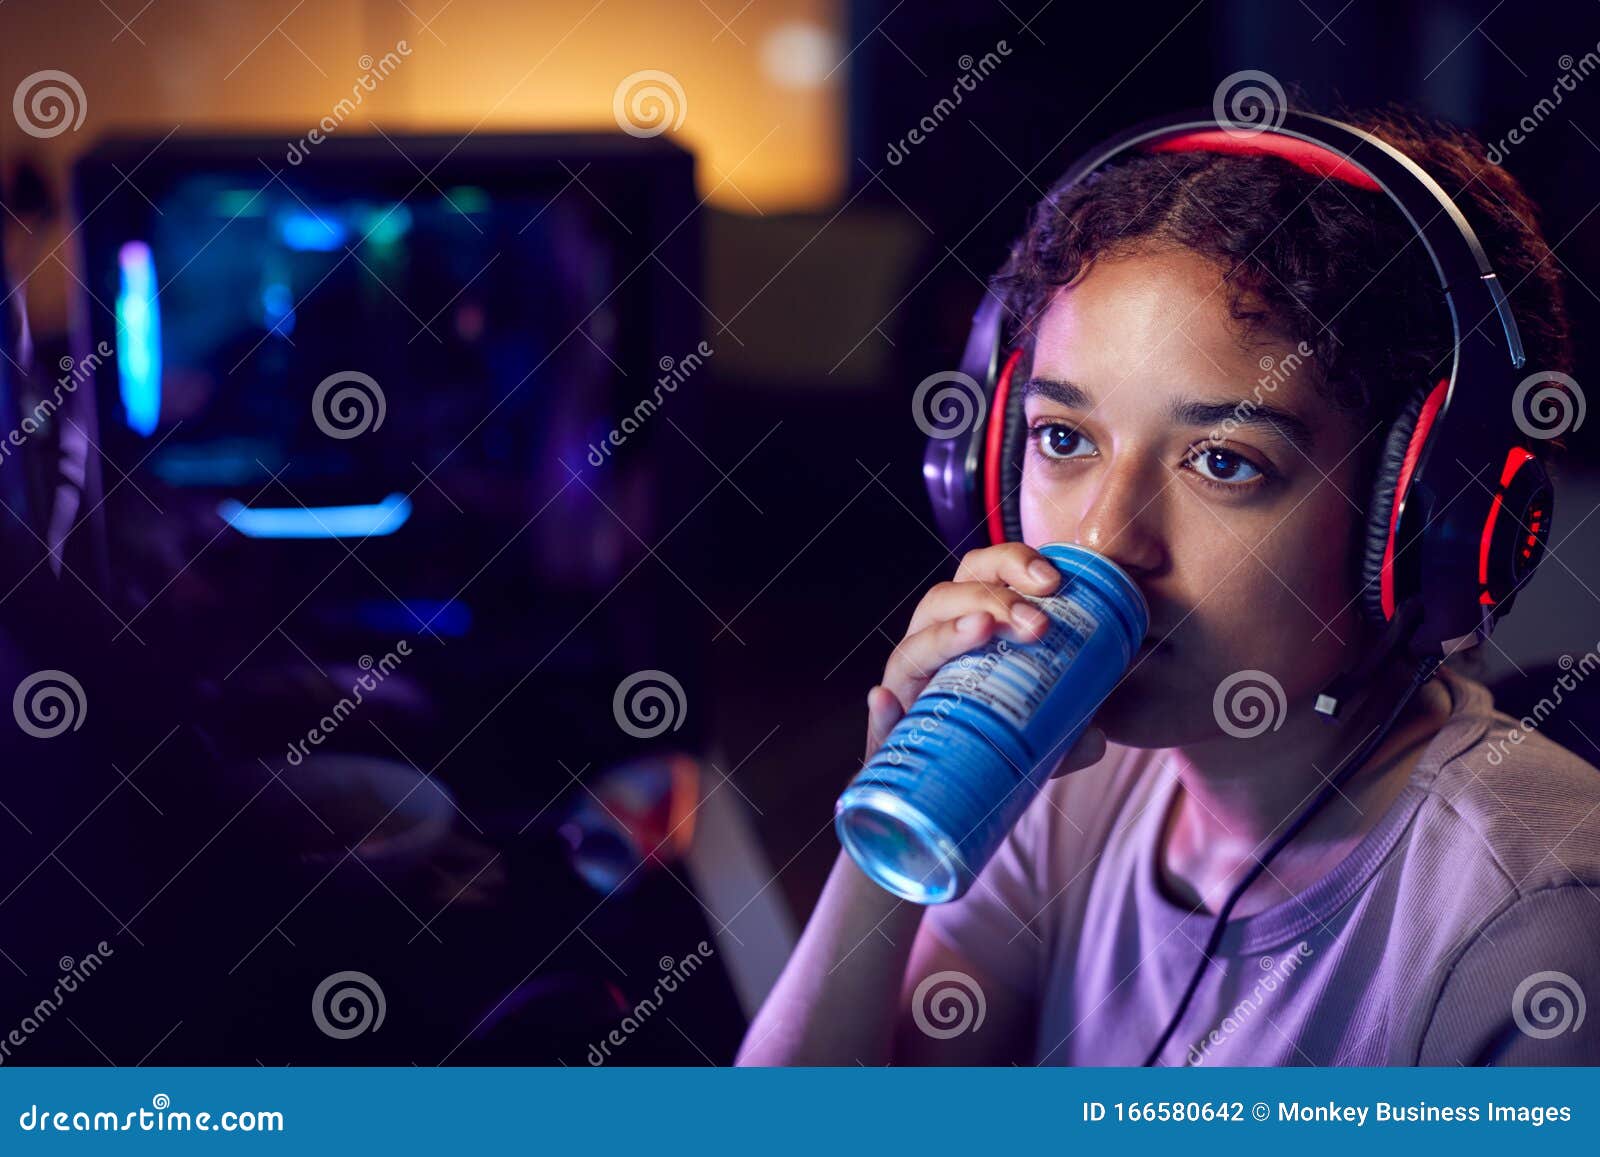 teenage girl drinking caffeine energy drink gaming at home using dual computer screens at night